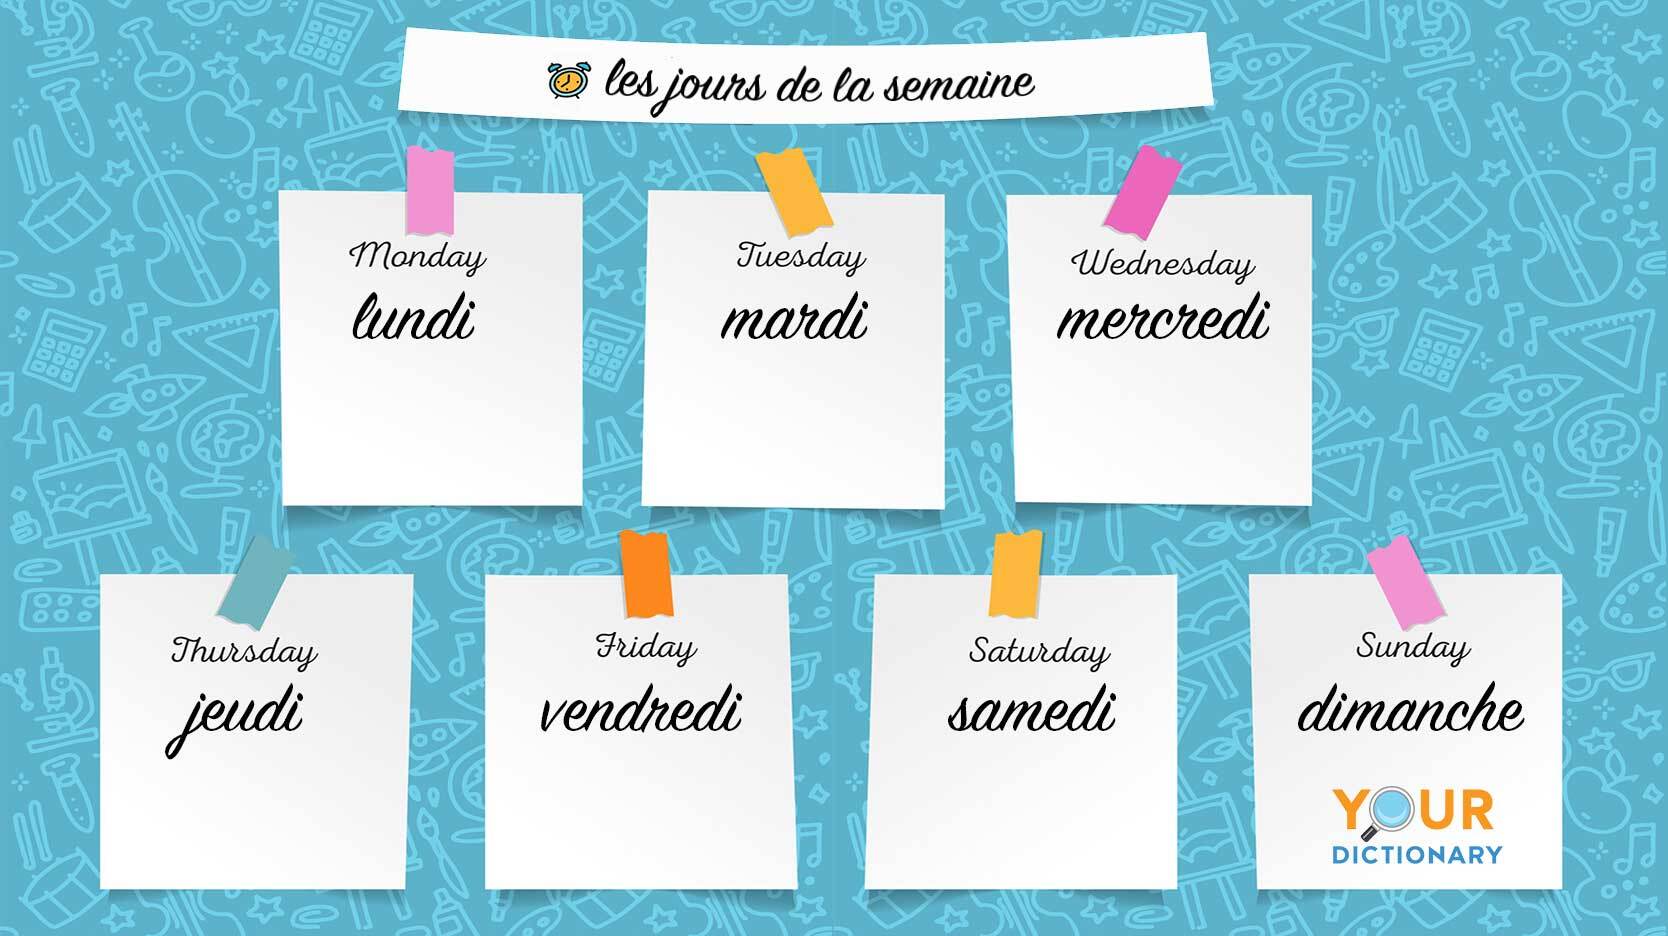 days of the week in French